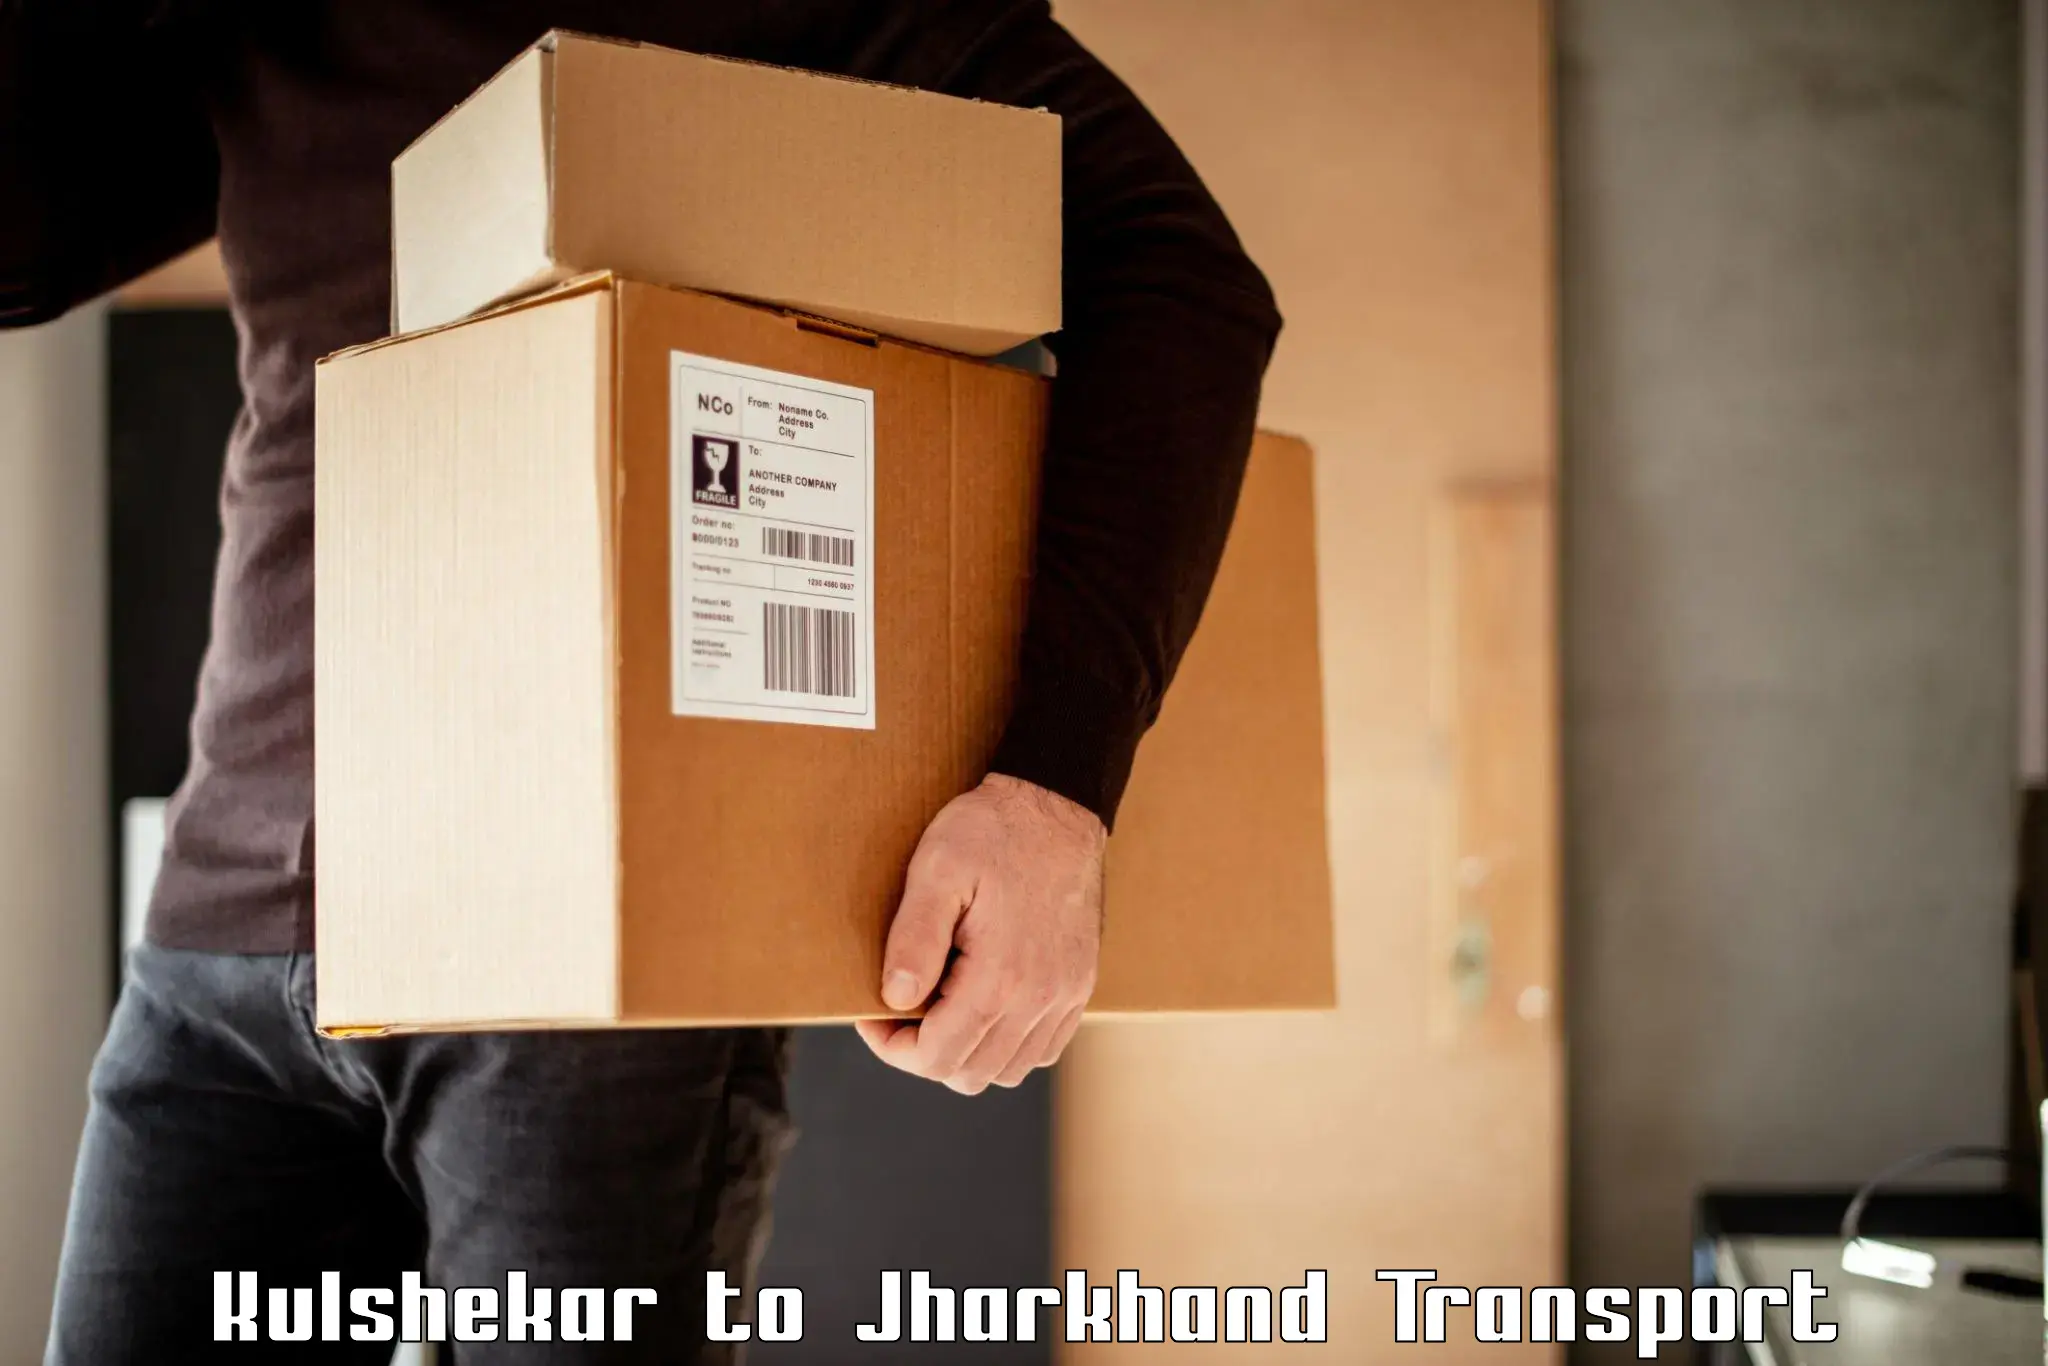 Air freight transport services in Kulshekar to Jamshedpur